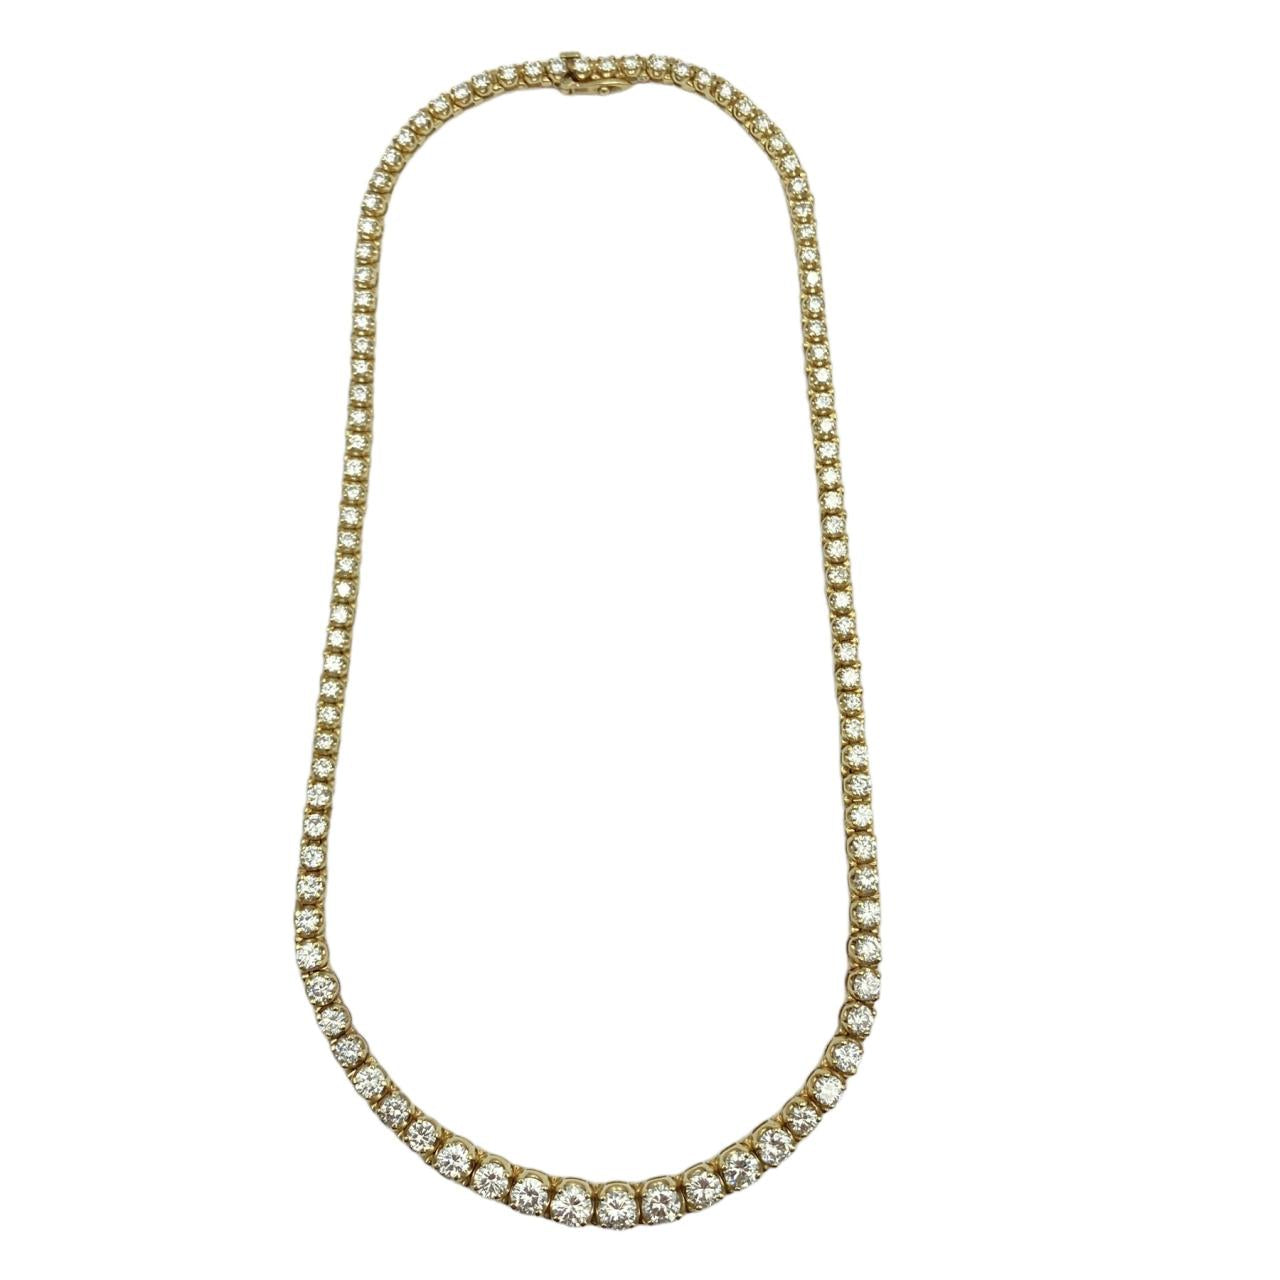 21.00 Carat IF Clarity E Color (Colorless) Diamond Estate Necklace 14K Yellow Gold 16 Inches